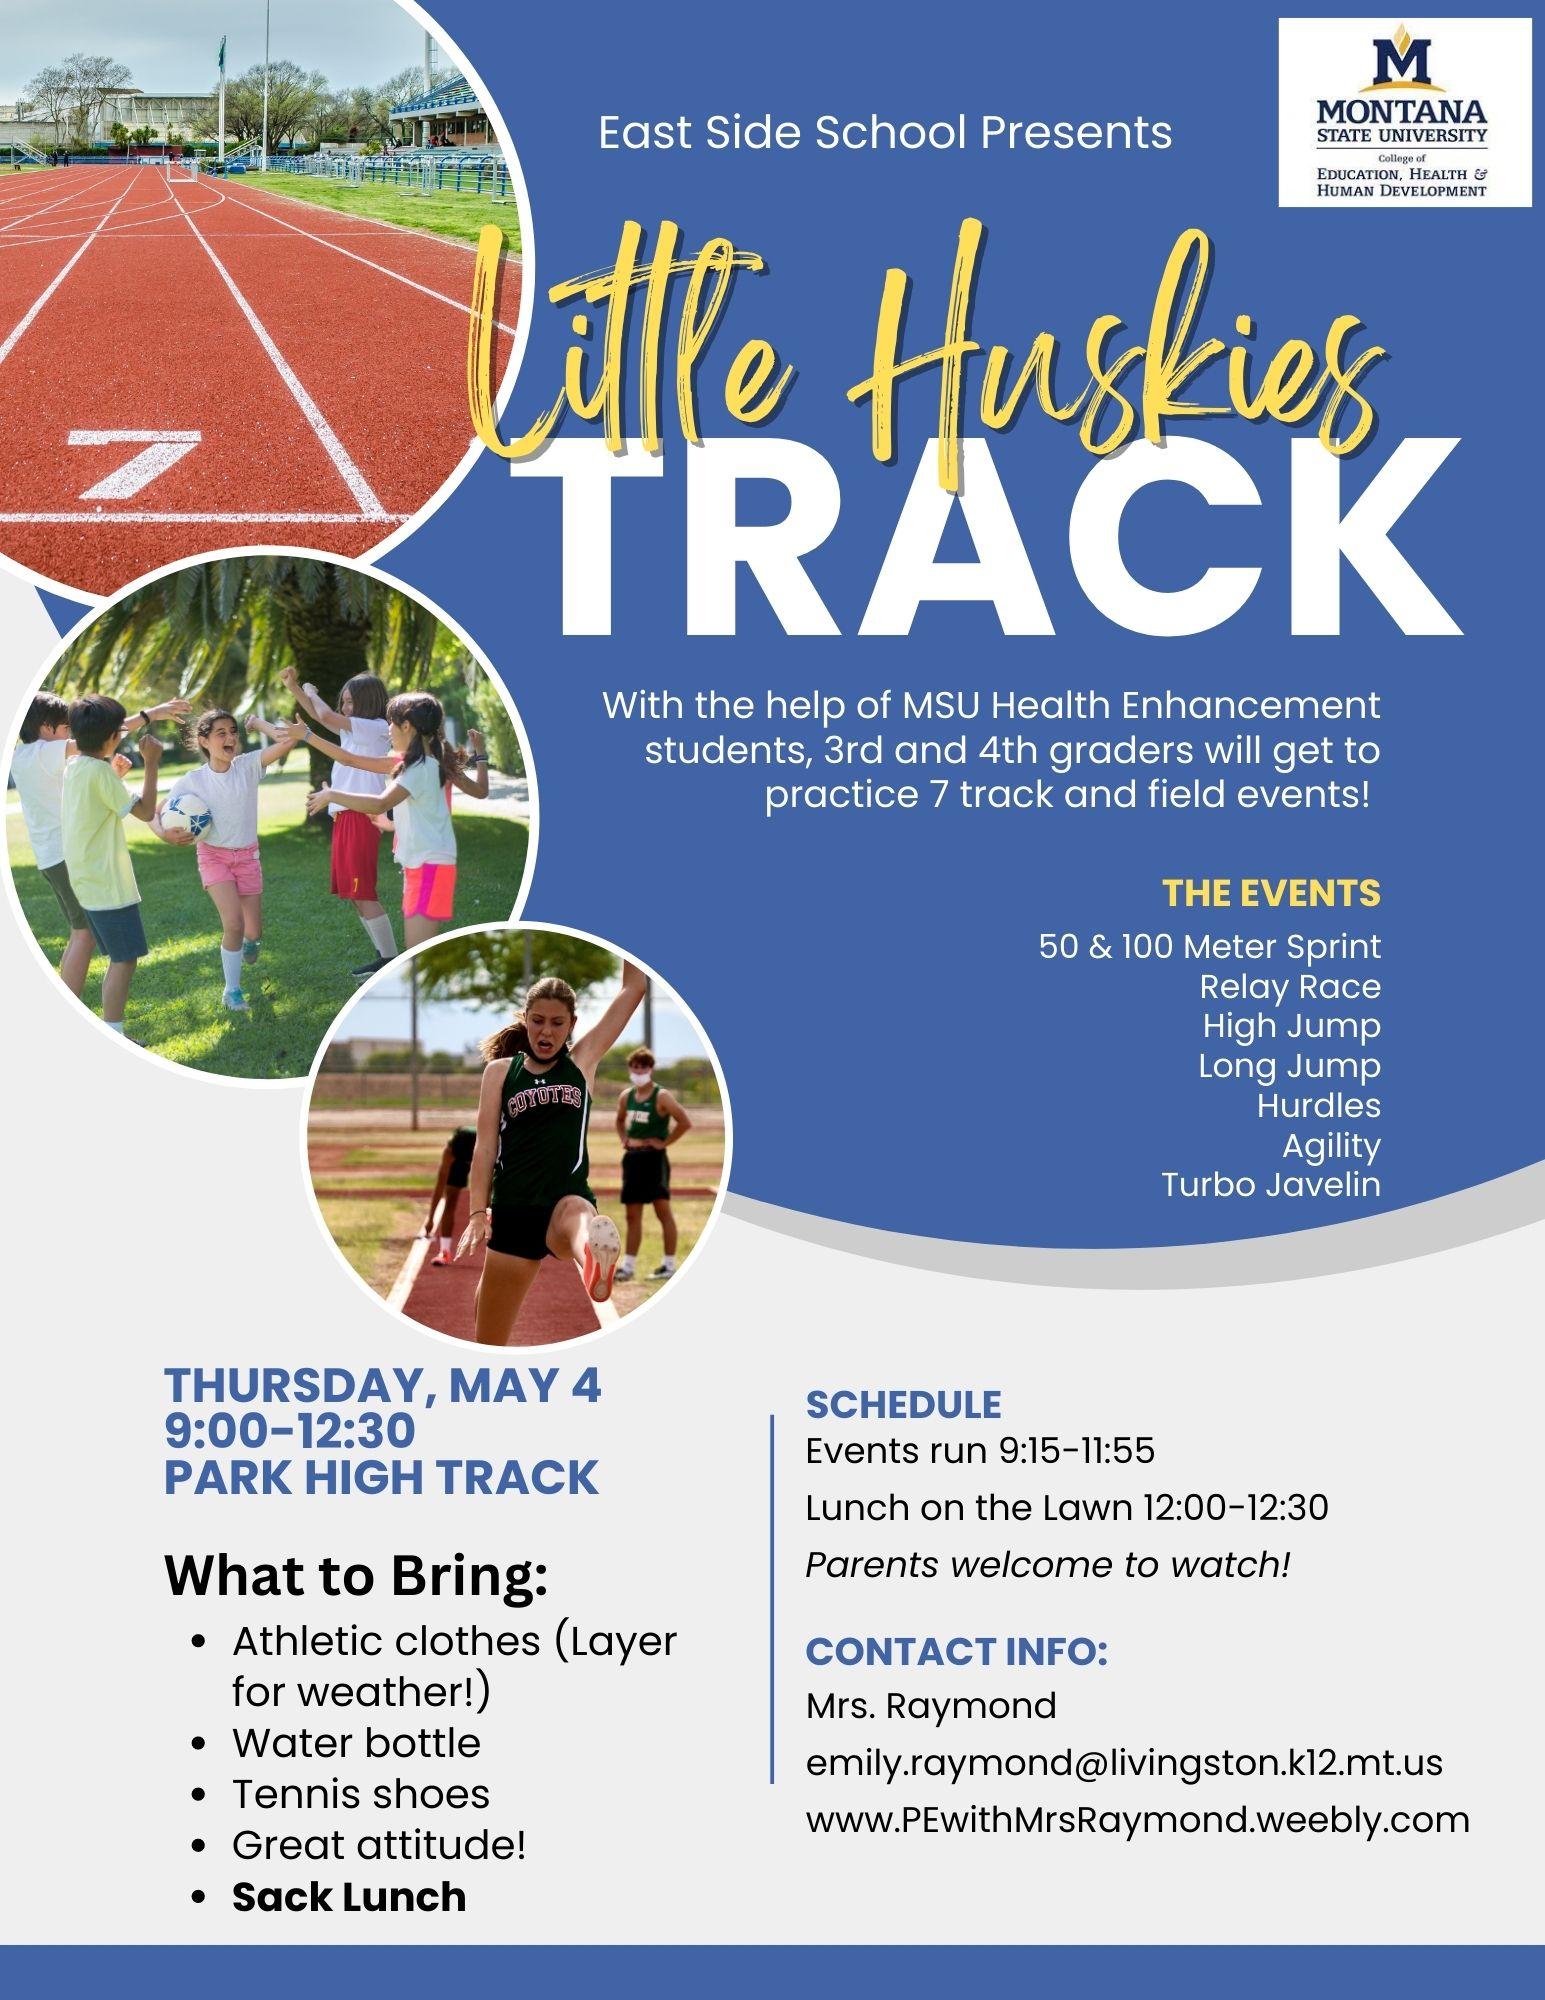 Flyer stating the track event for East Side 3rd and 4th graders will be held May 4 at 9am